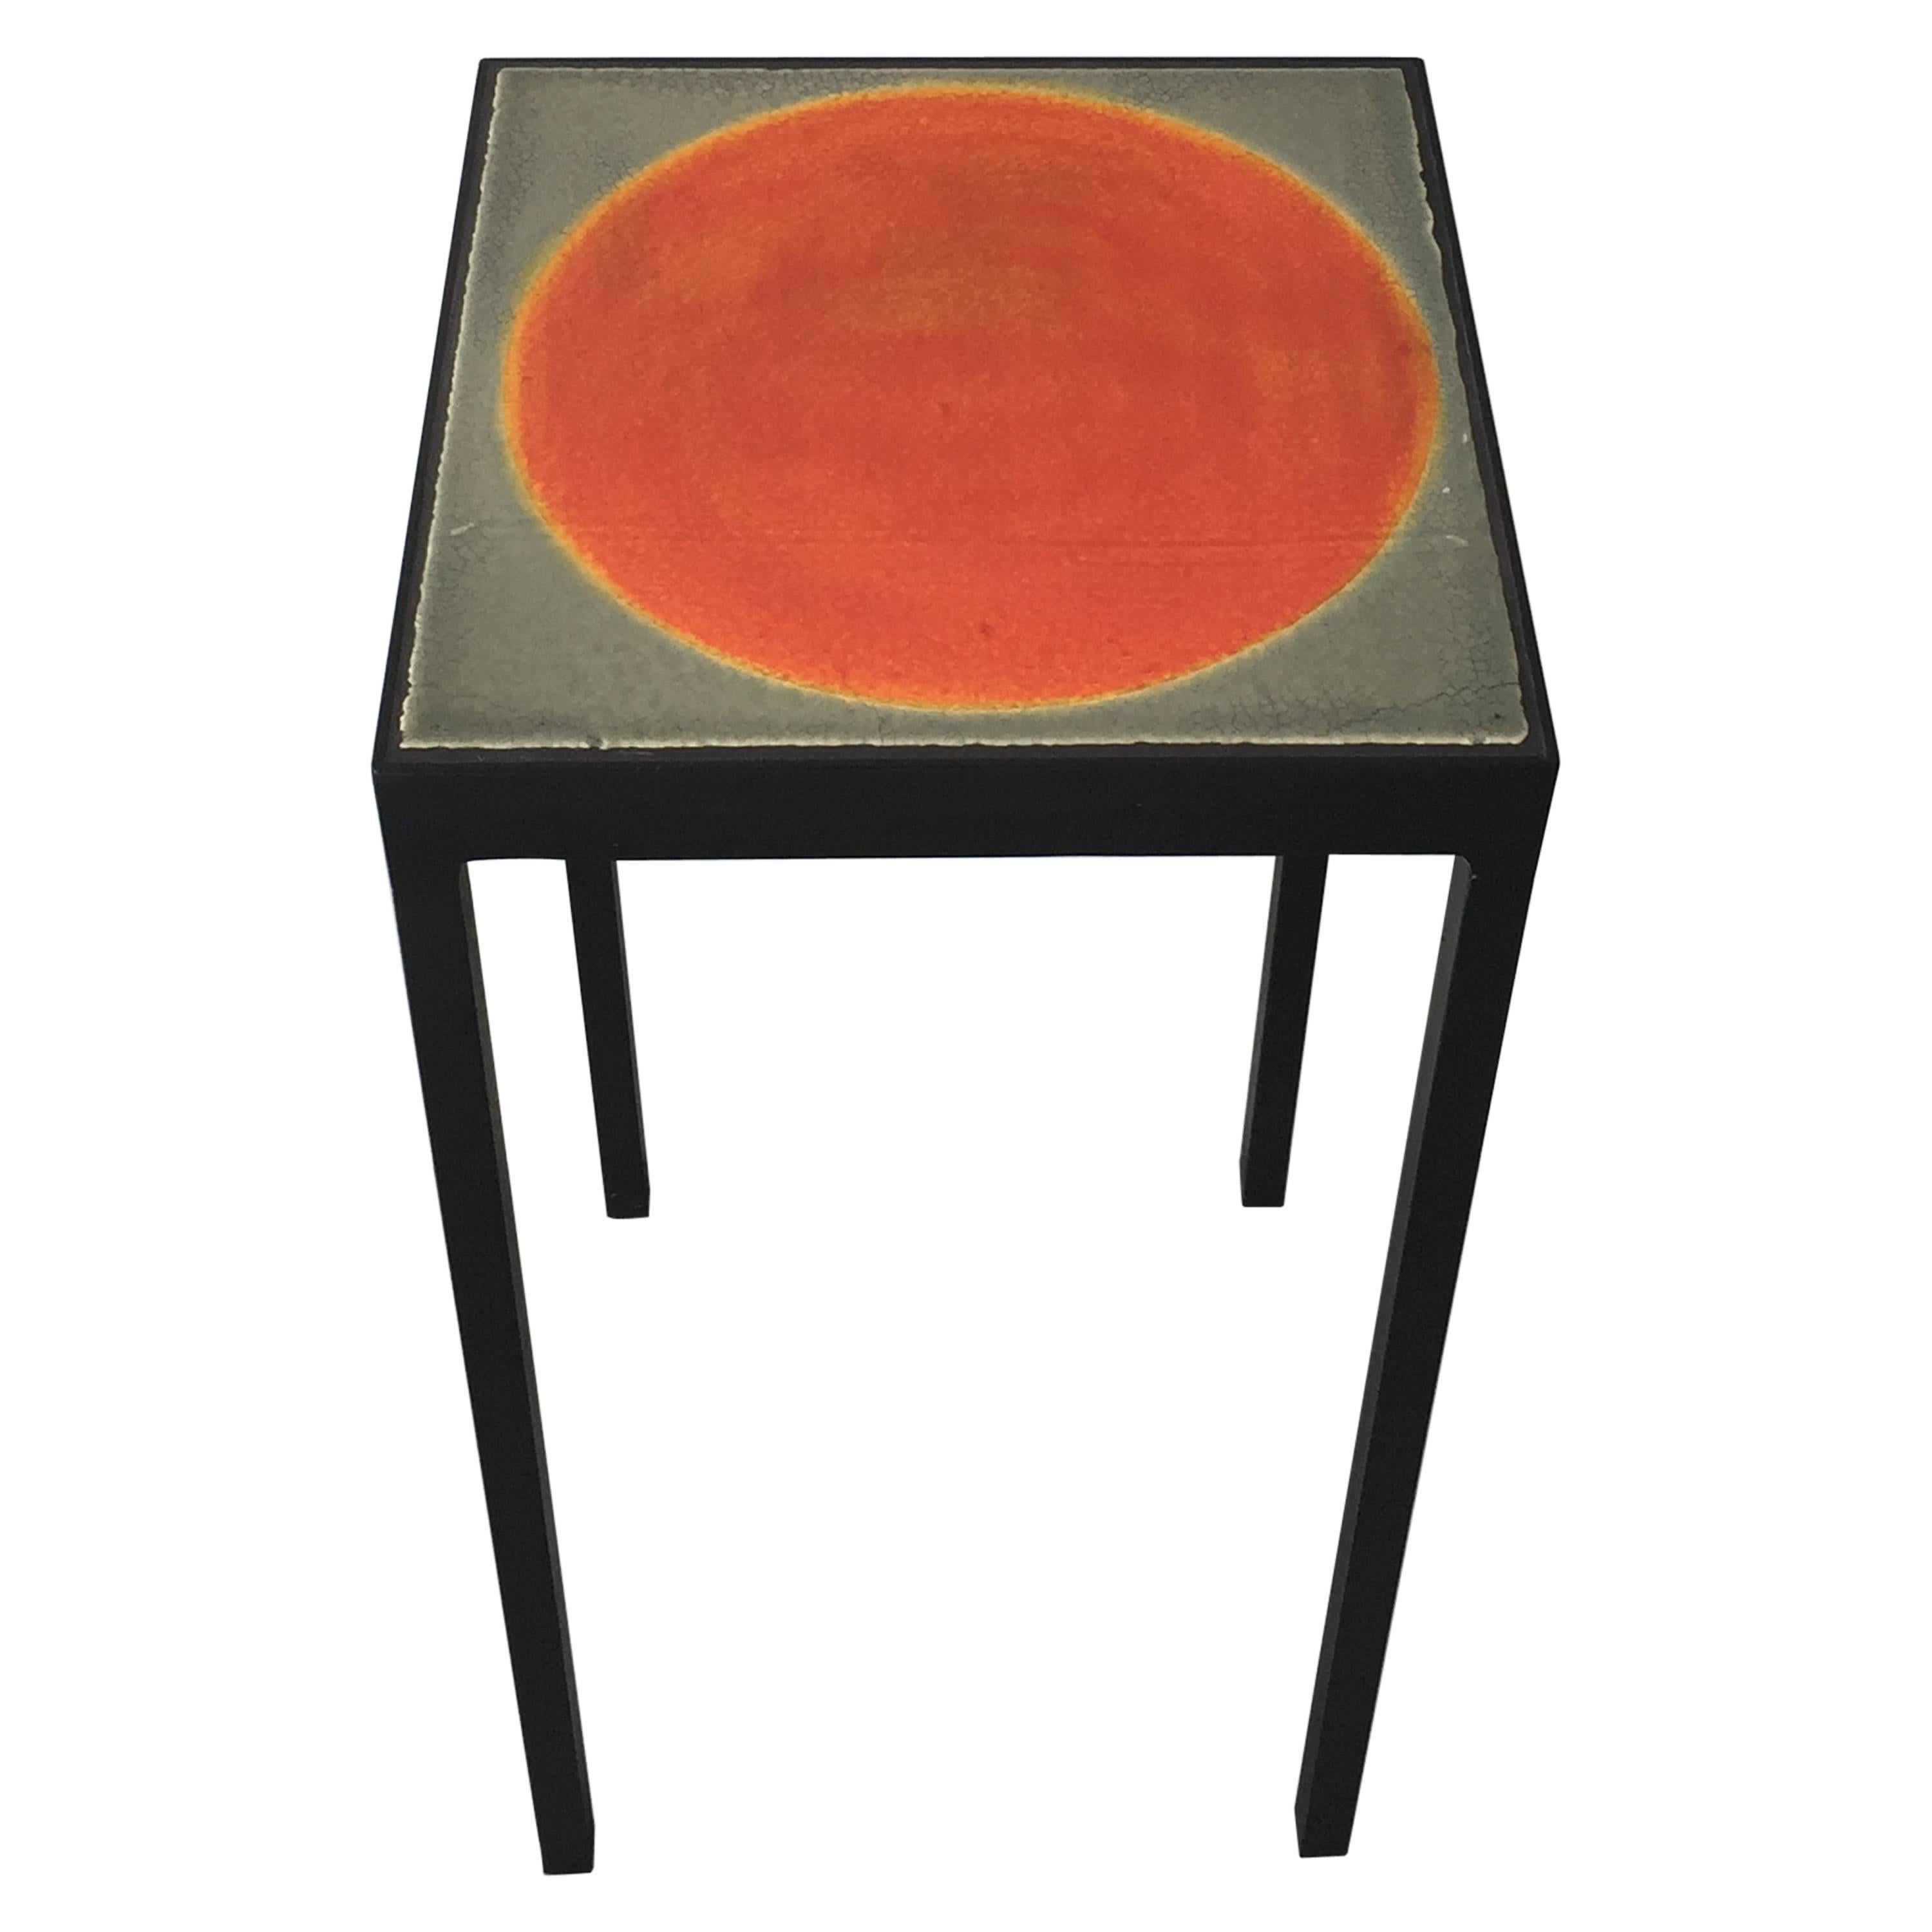 Baby Side Table with Roger Capron Tile